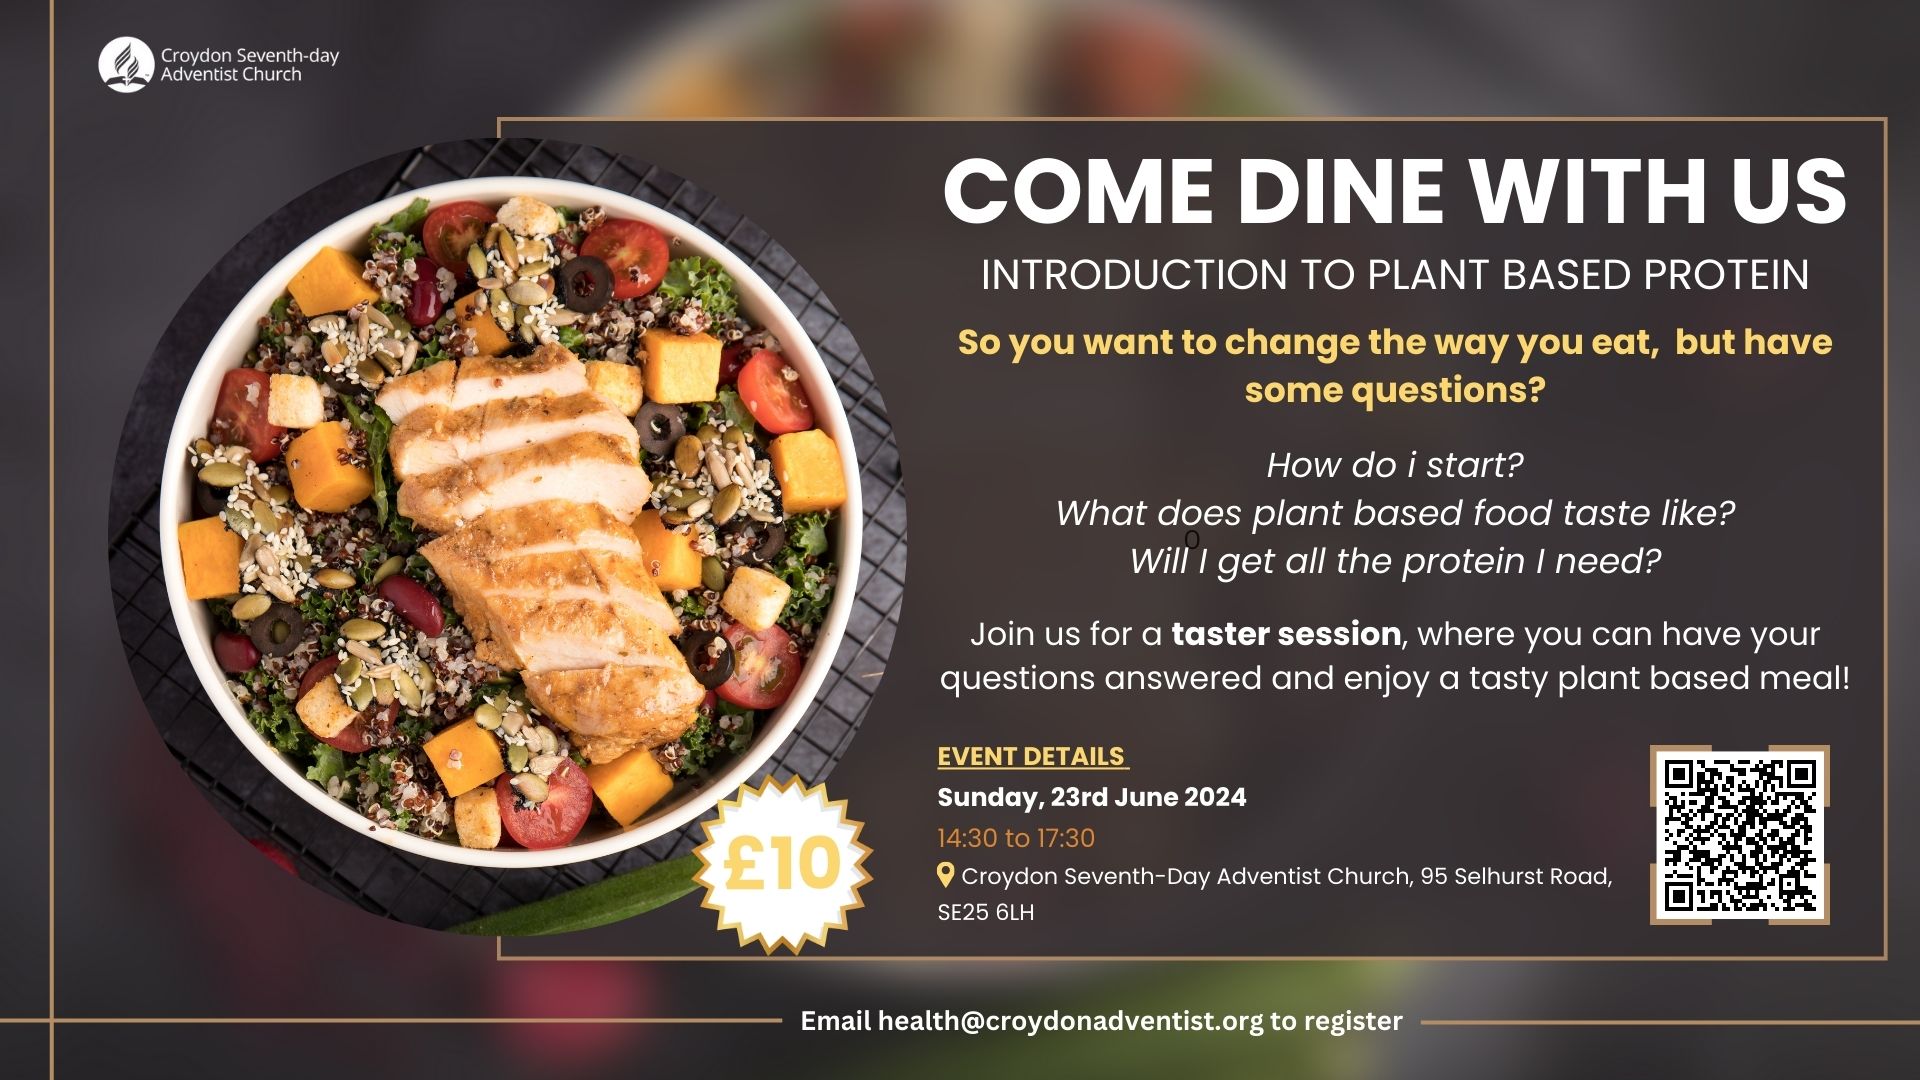 So you want to change the way you eat, but have some questions? How do i start? What does plant based food taste like? Will I get all the protein I need? Join us for a taster session, where you can have your questions answered and enjoy a tasty plant based meal